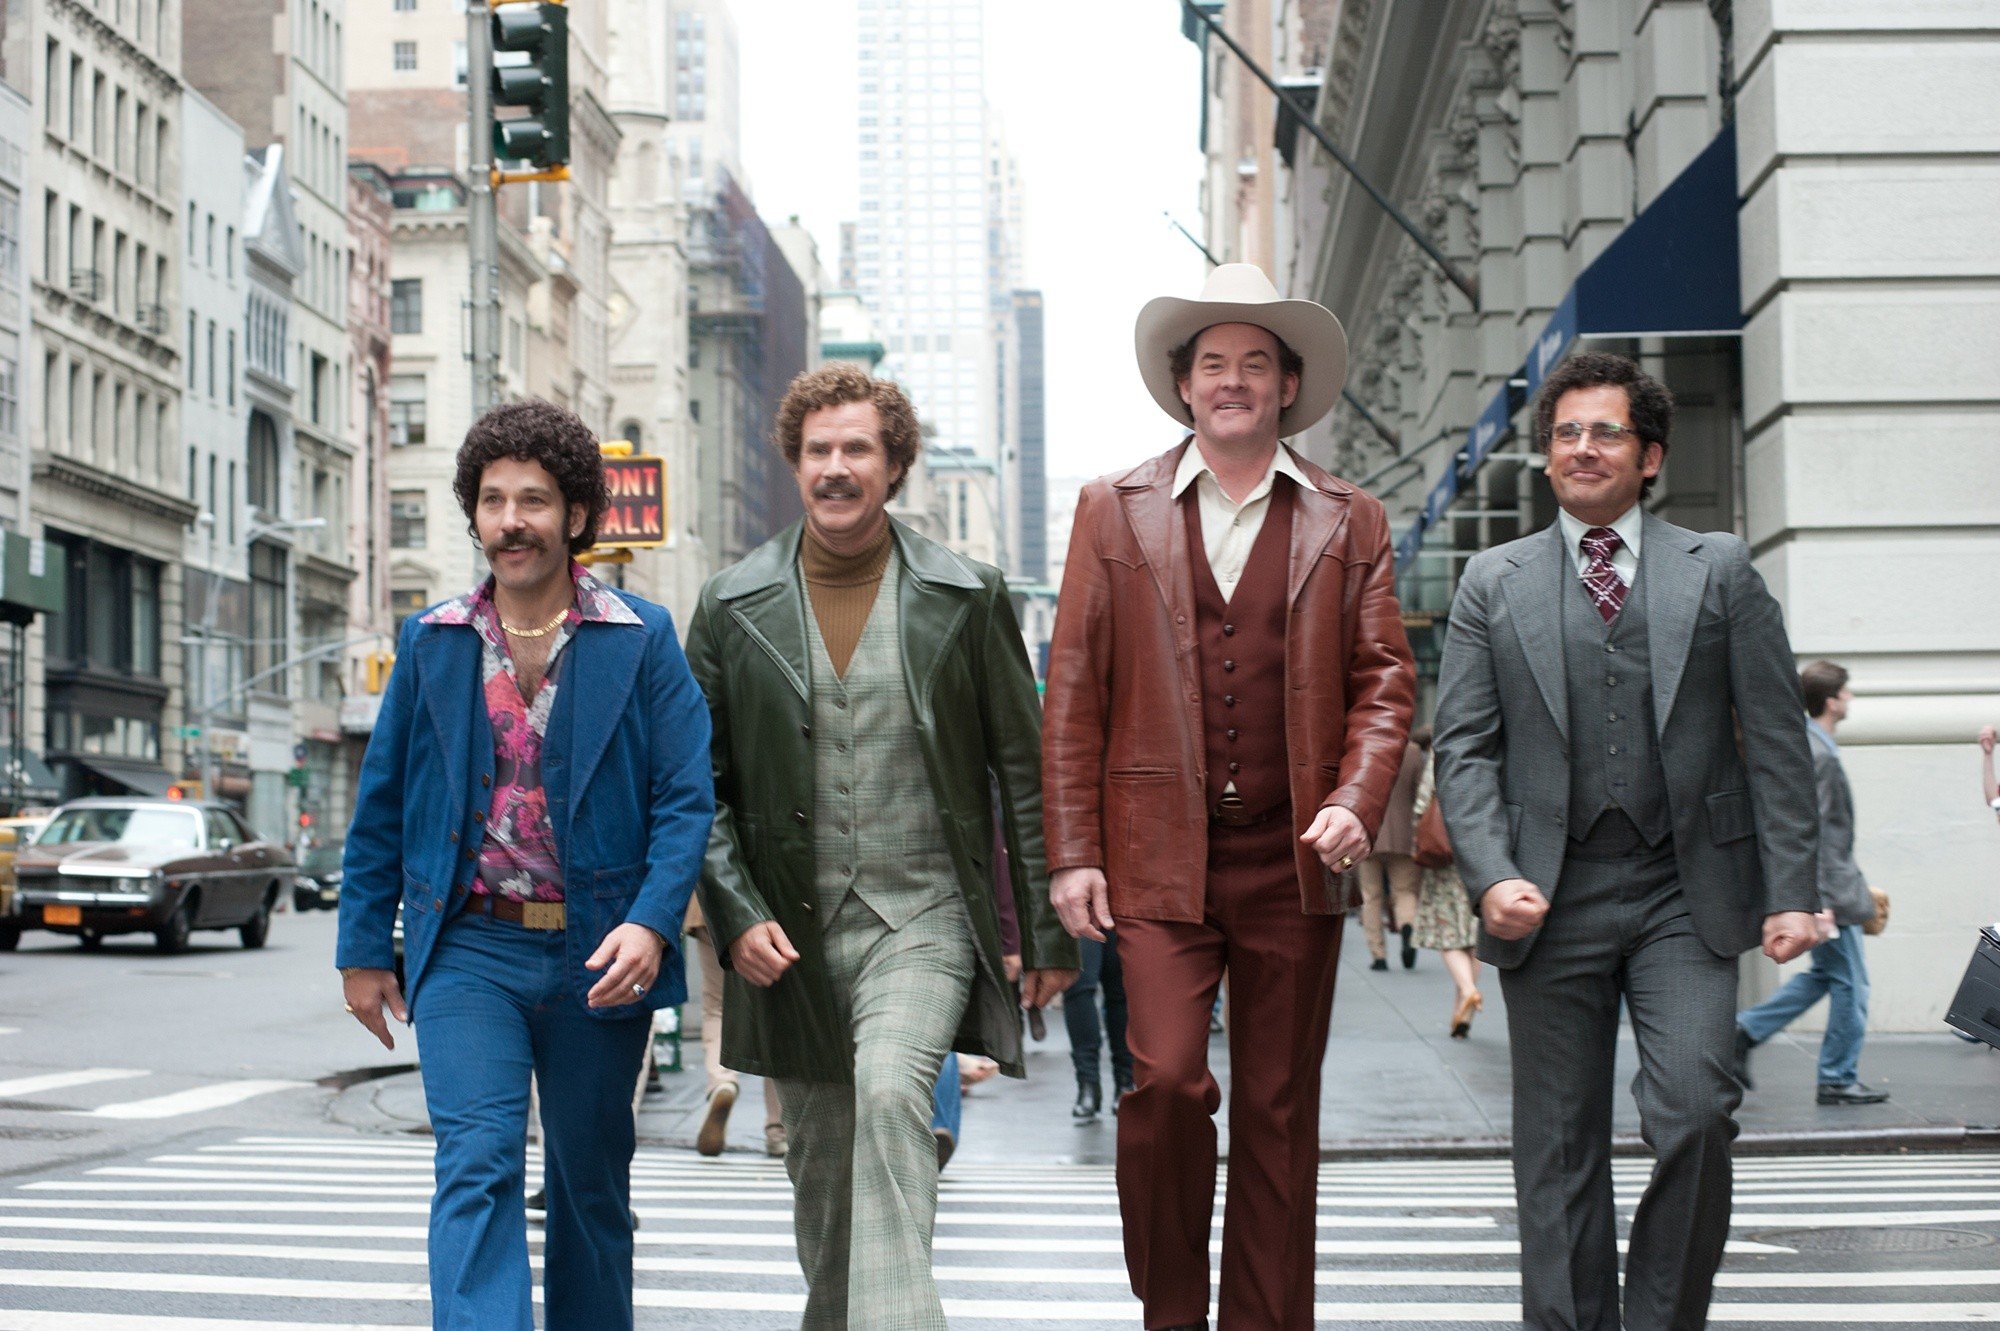 Paul Rudd, Will Ferrell, David Koechner and Steve Carell in Paramount Pictures' Anchorman: The Legend Continues (2013)